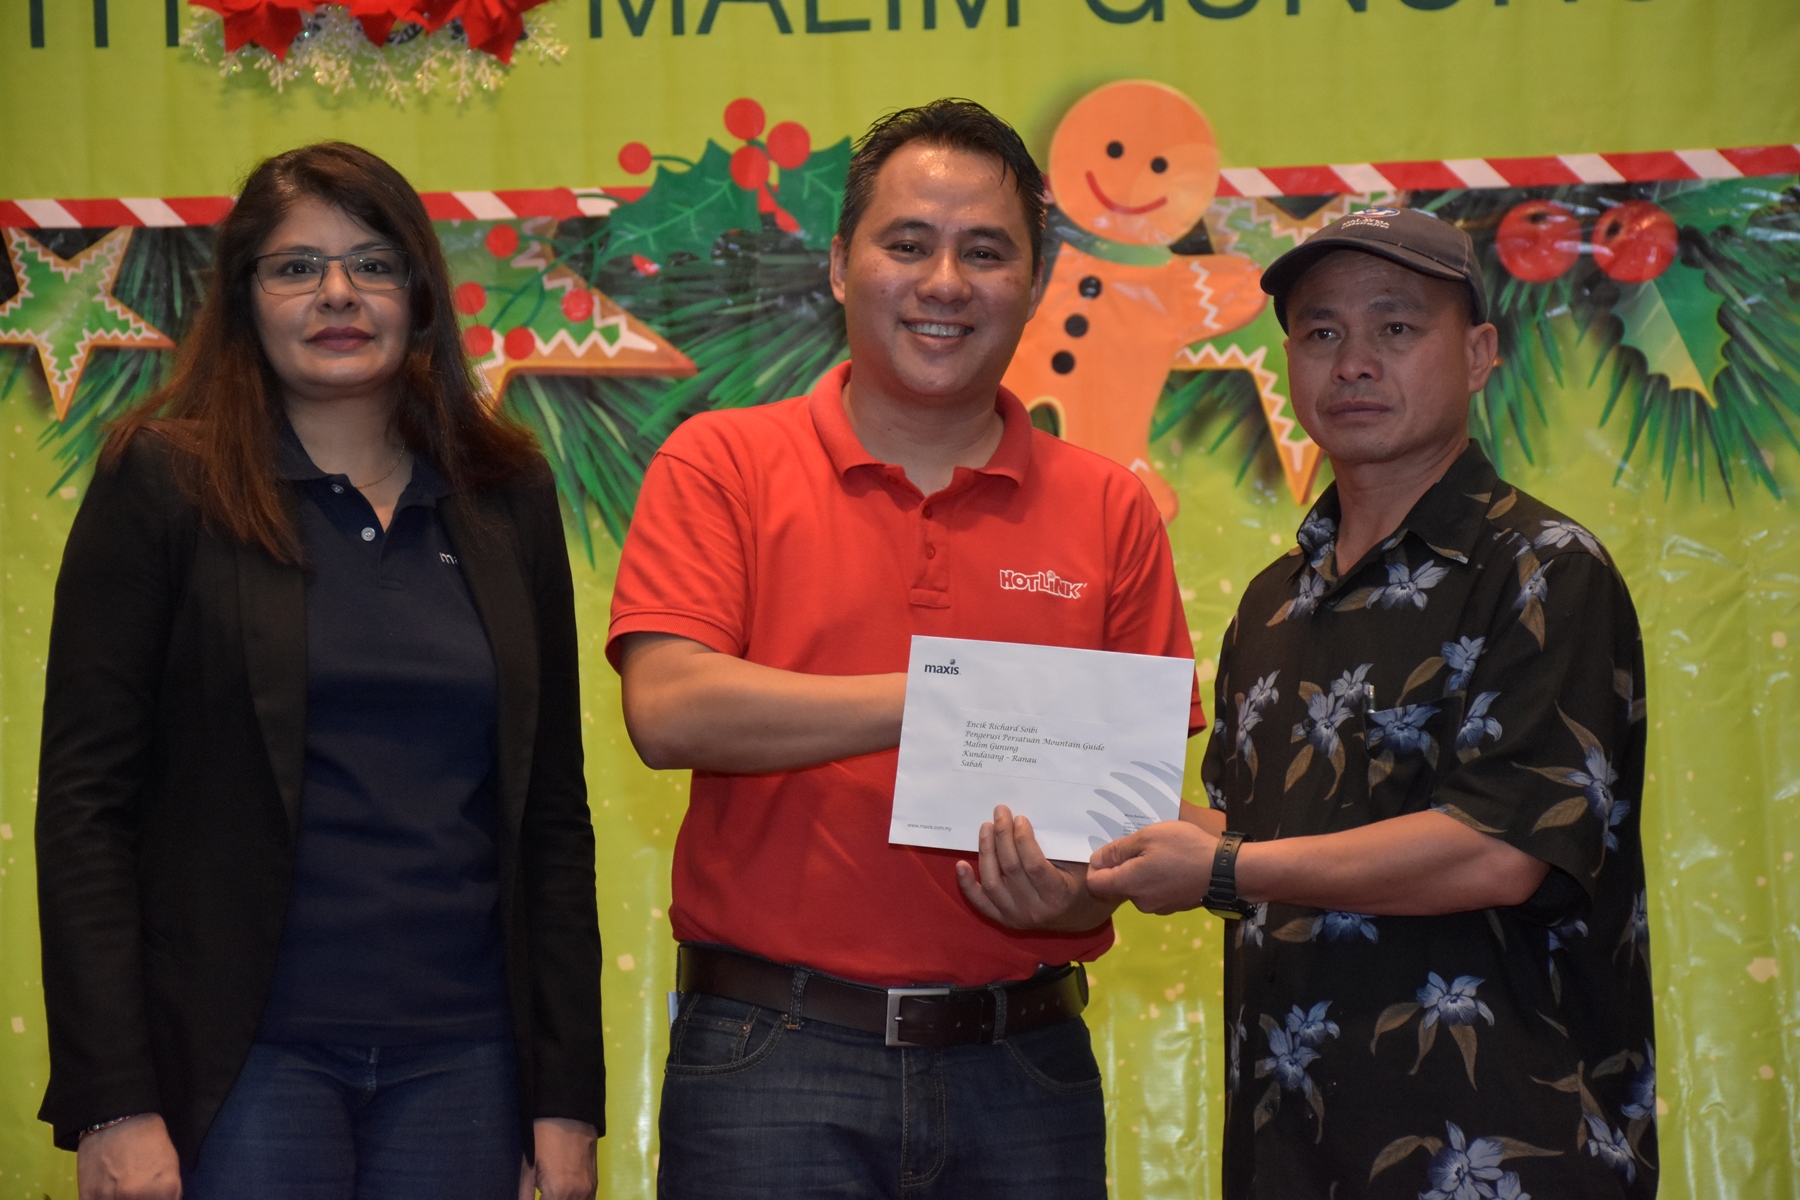 Photo 4: Maxis contributed RM10,000 to Richard Soibi, Chairman, Mount Kinabalu Guides Association. (From Left, Mariam Bevi Batcha, Head of Corporate Affairs and Melvin Jeffrine Mojinun, Maxis Head of Sabah Region)